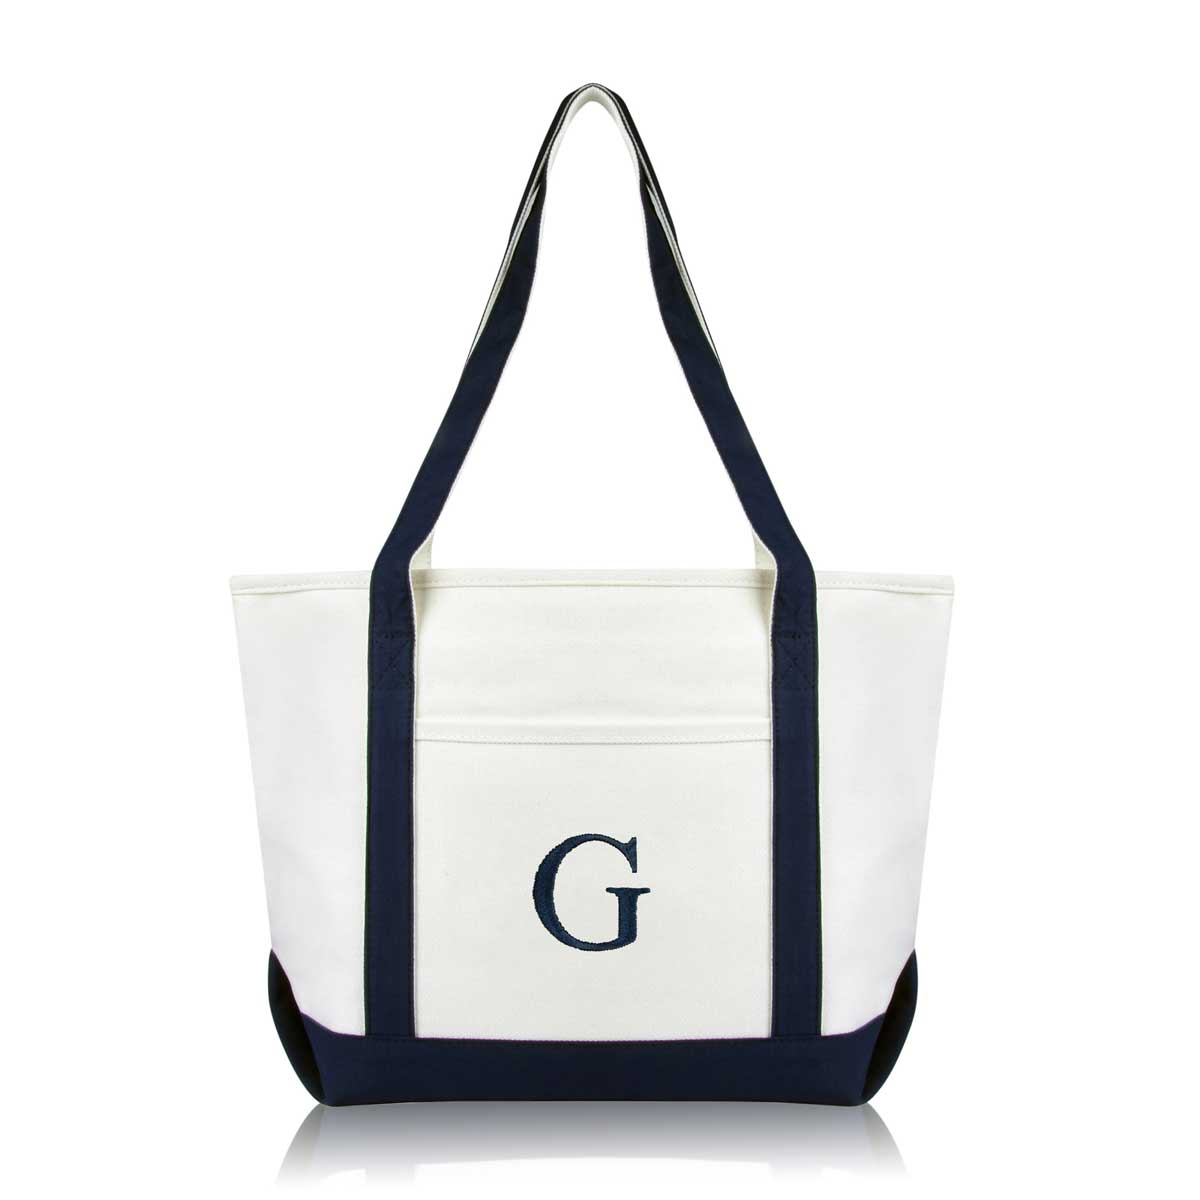 Dalix Medium Personalized Tote Bag Monogrammed Initial Letter - G